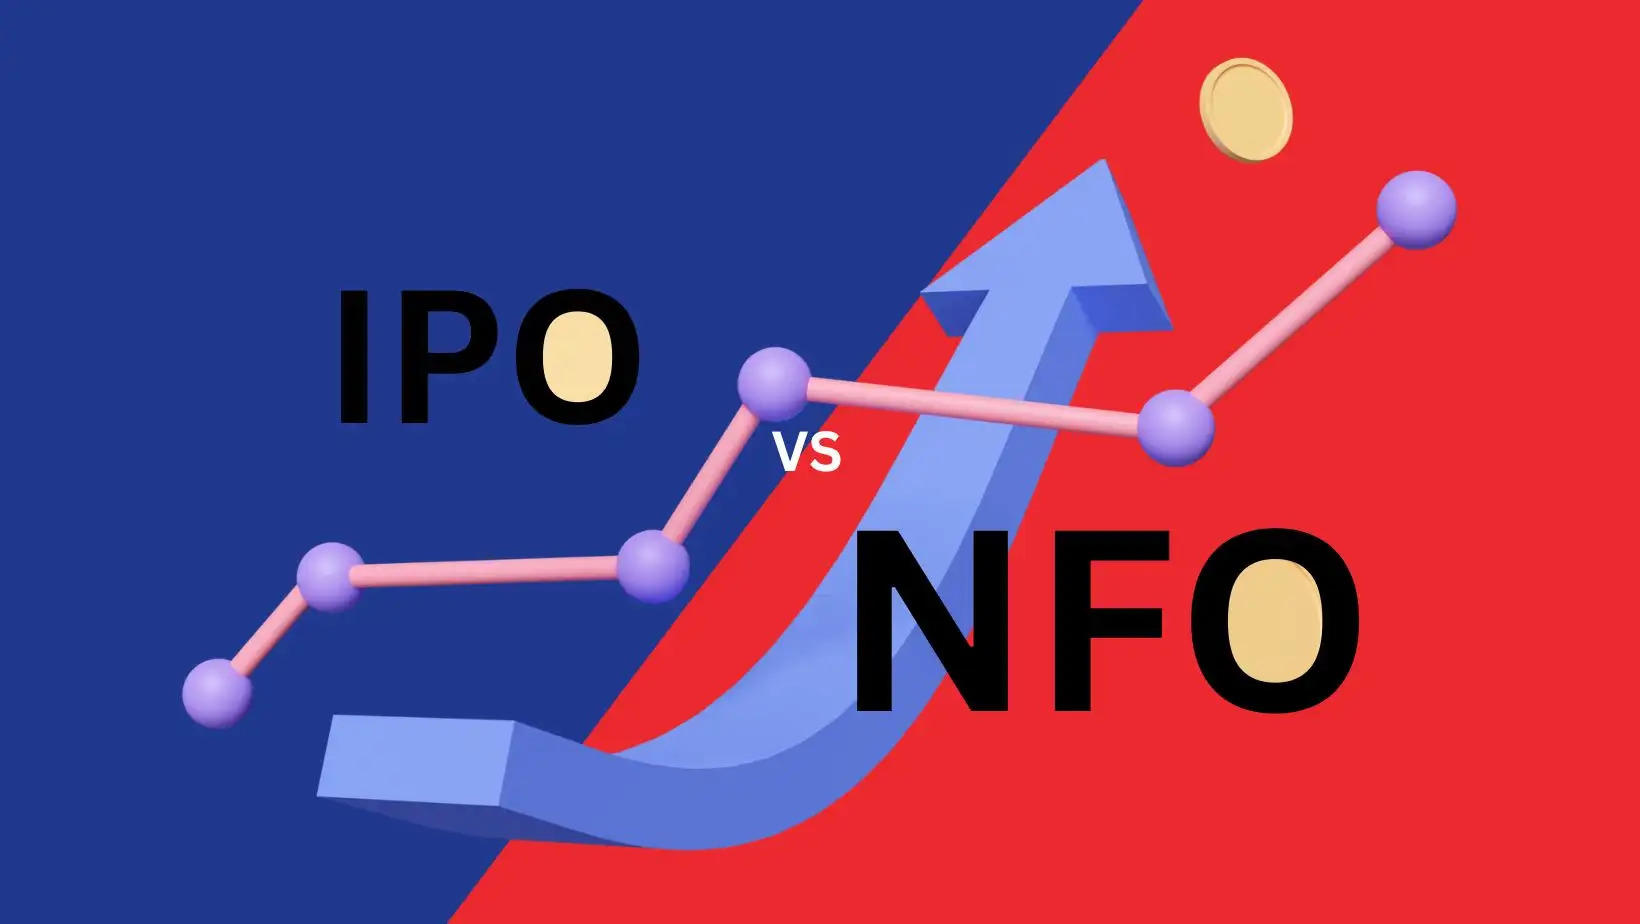 Know the difference between IPO and NFO